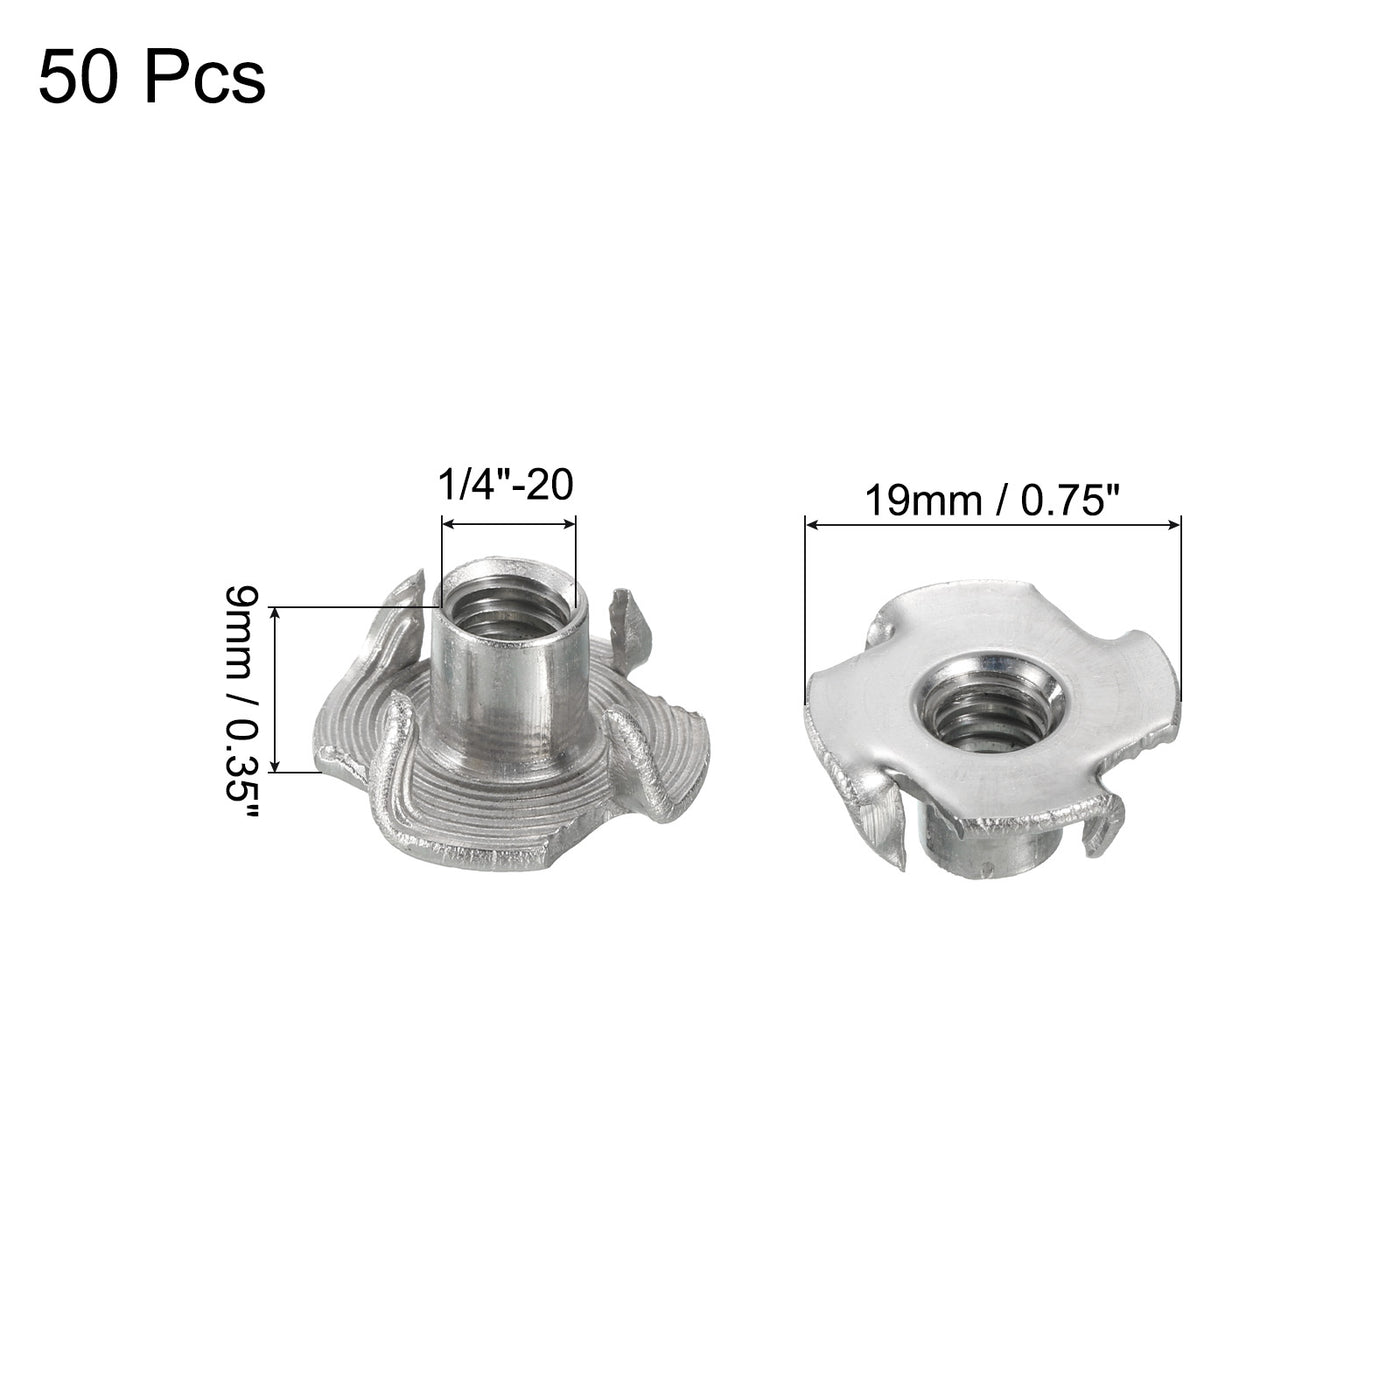 uxcell Uxcell 1/4"-20 T-nut 50pcs 304 Stainless Steel 4 Pronged Tee Nuts Threaded Insertion